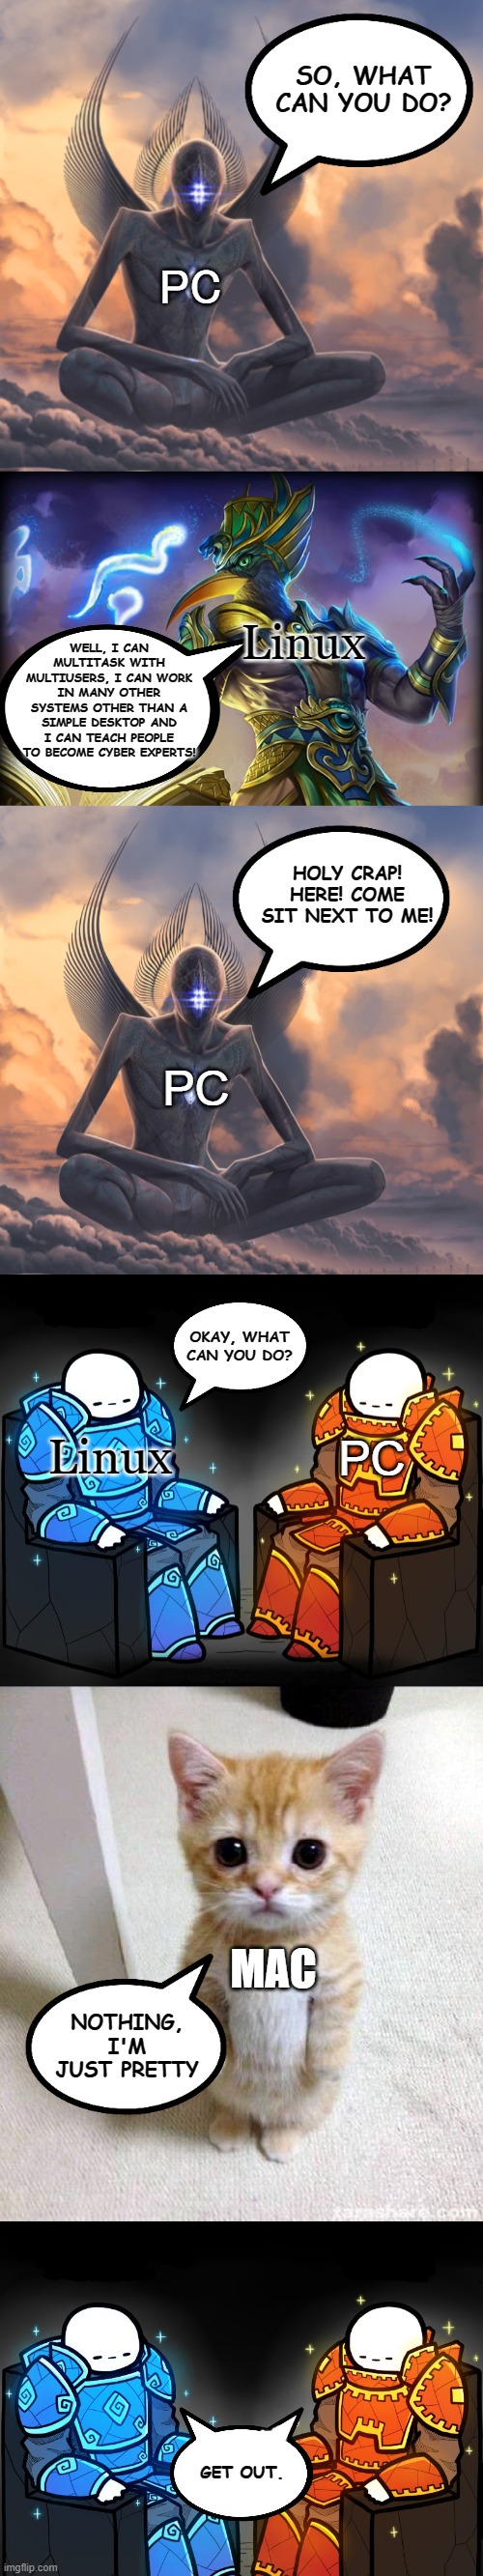 Two gods and a peasant |  SO, WHAT CAN YOU DO? PC; WELL, I CAN MULTITASK WITH MULTIUSERS, I CAN WORK IN MANY OTHER SYSTEMS OTHER THAN A SIMPLE DESKTOP AND I CAN TEACH PEOPLE TO BECOME CYBER EXPERTS! Linux; HOLY CRAP!
HERE! COME SIT NEXT TO ME! PC; OKAY, WHAT CAN YOU DO? Linux; PC; MAC; NOTHING, I'M JUST PRETTY; GET OUT. | image tagged in metahuman,2 gods and a peasant,memes,cute cat,linux,funny | made w/ Imgflip meme maker